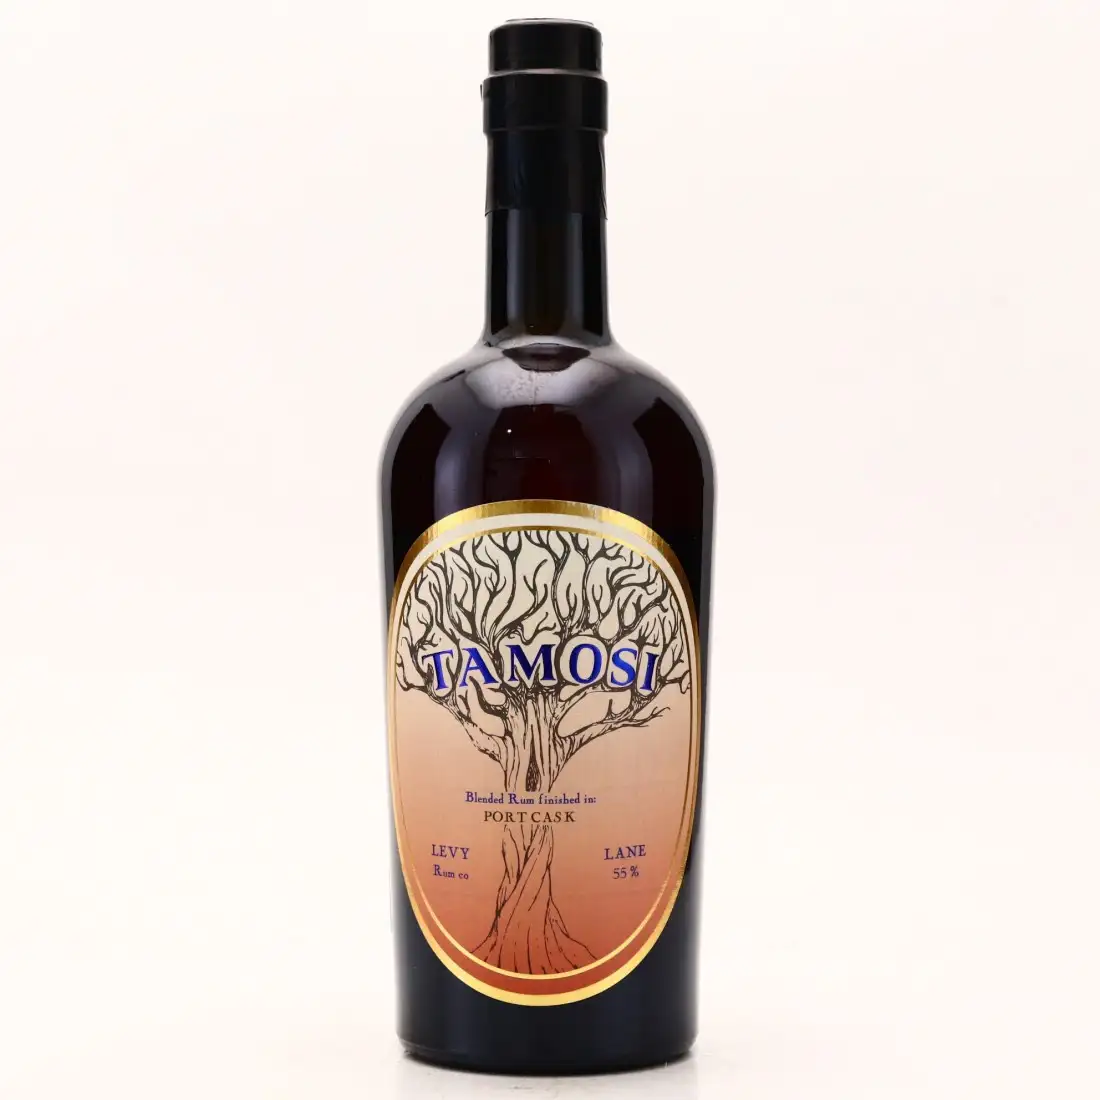 Image of the front of the bottle of the rum Tamosi Rum Port Cask